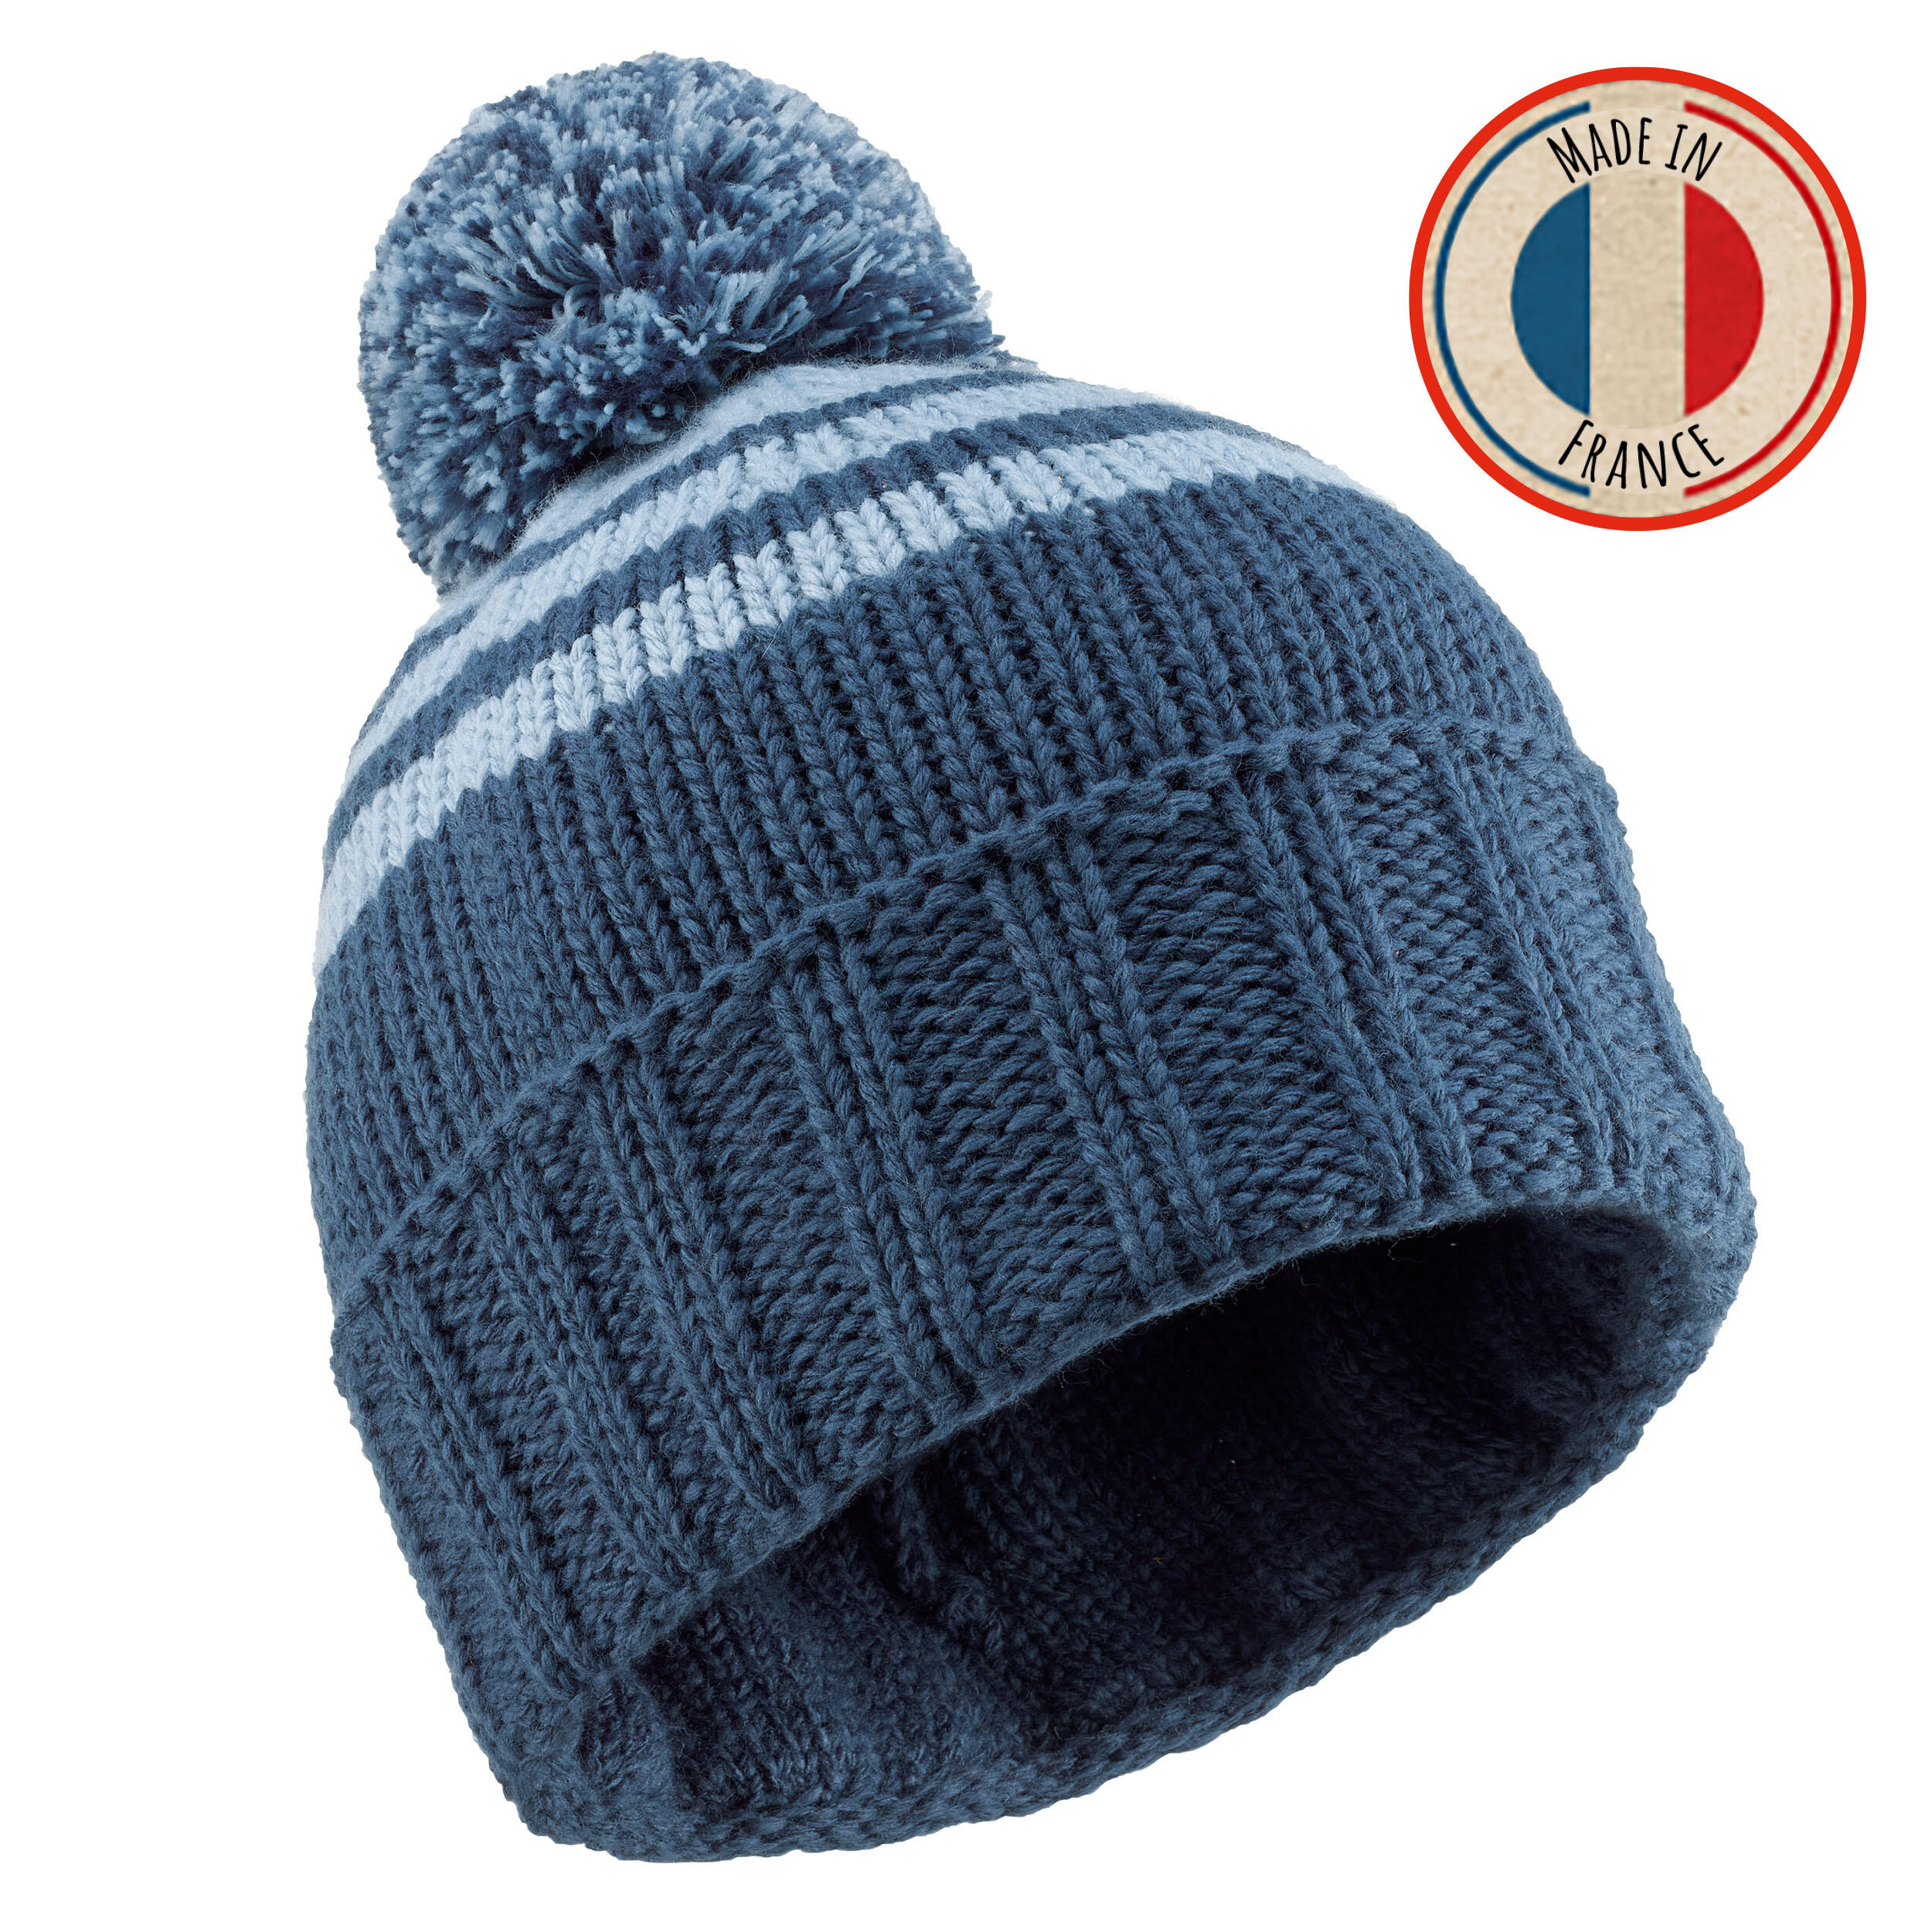 WEDZE ADULT SKI HAT GRAND NORD MADE IN FRANCE NAVY BLUE-BLUE